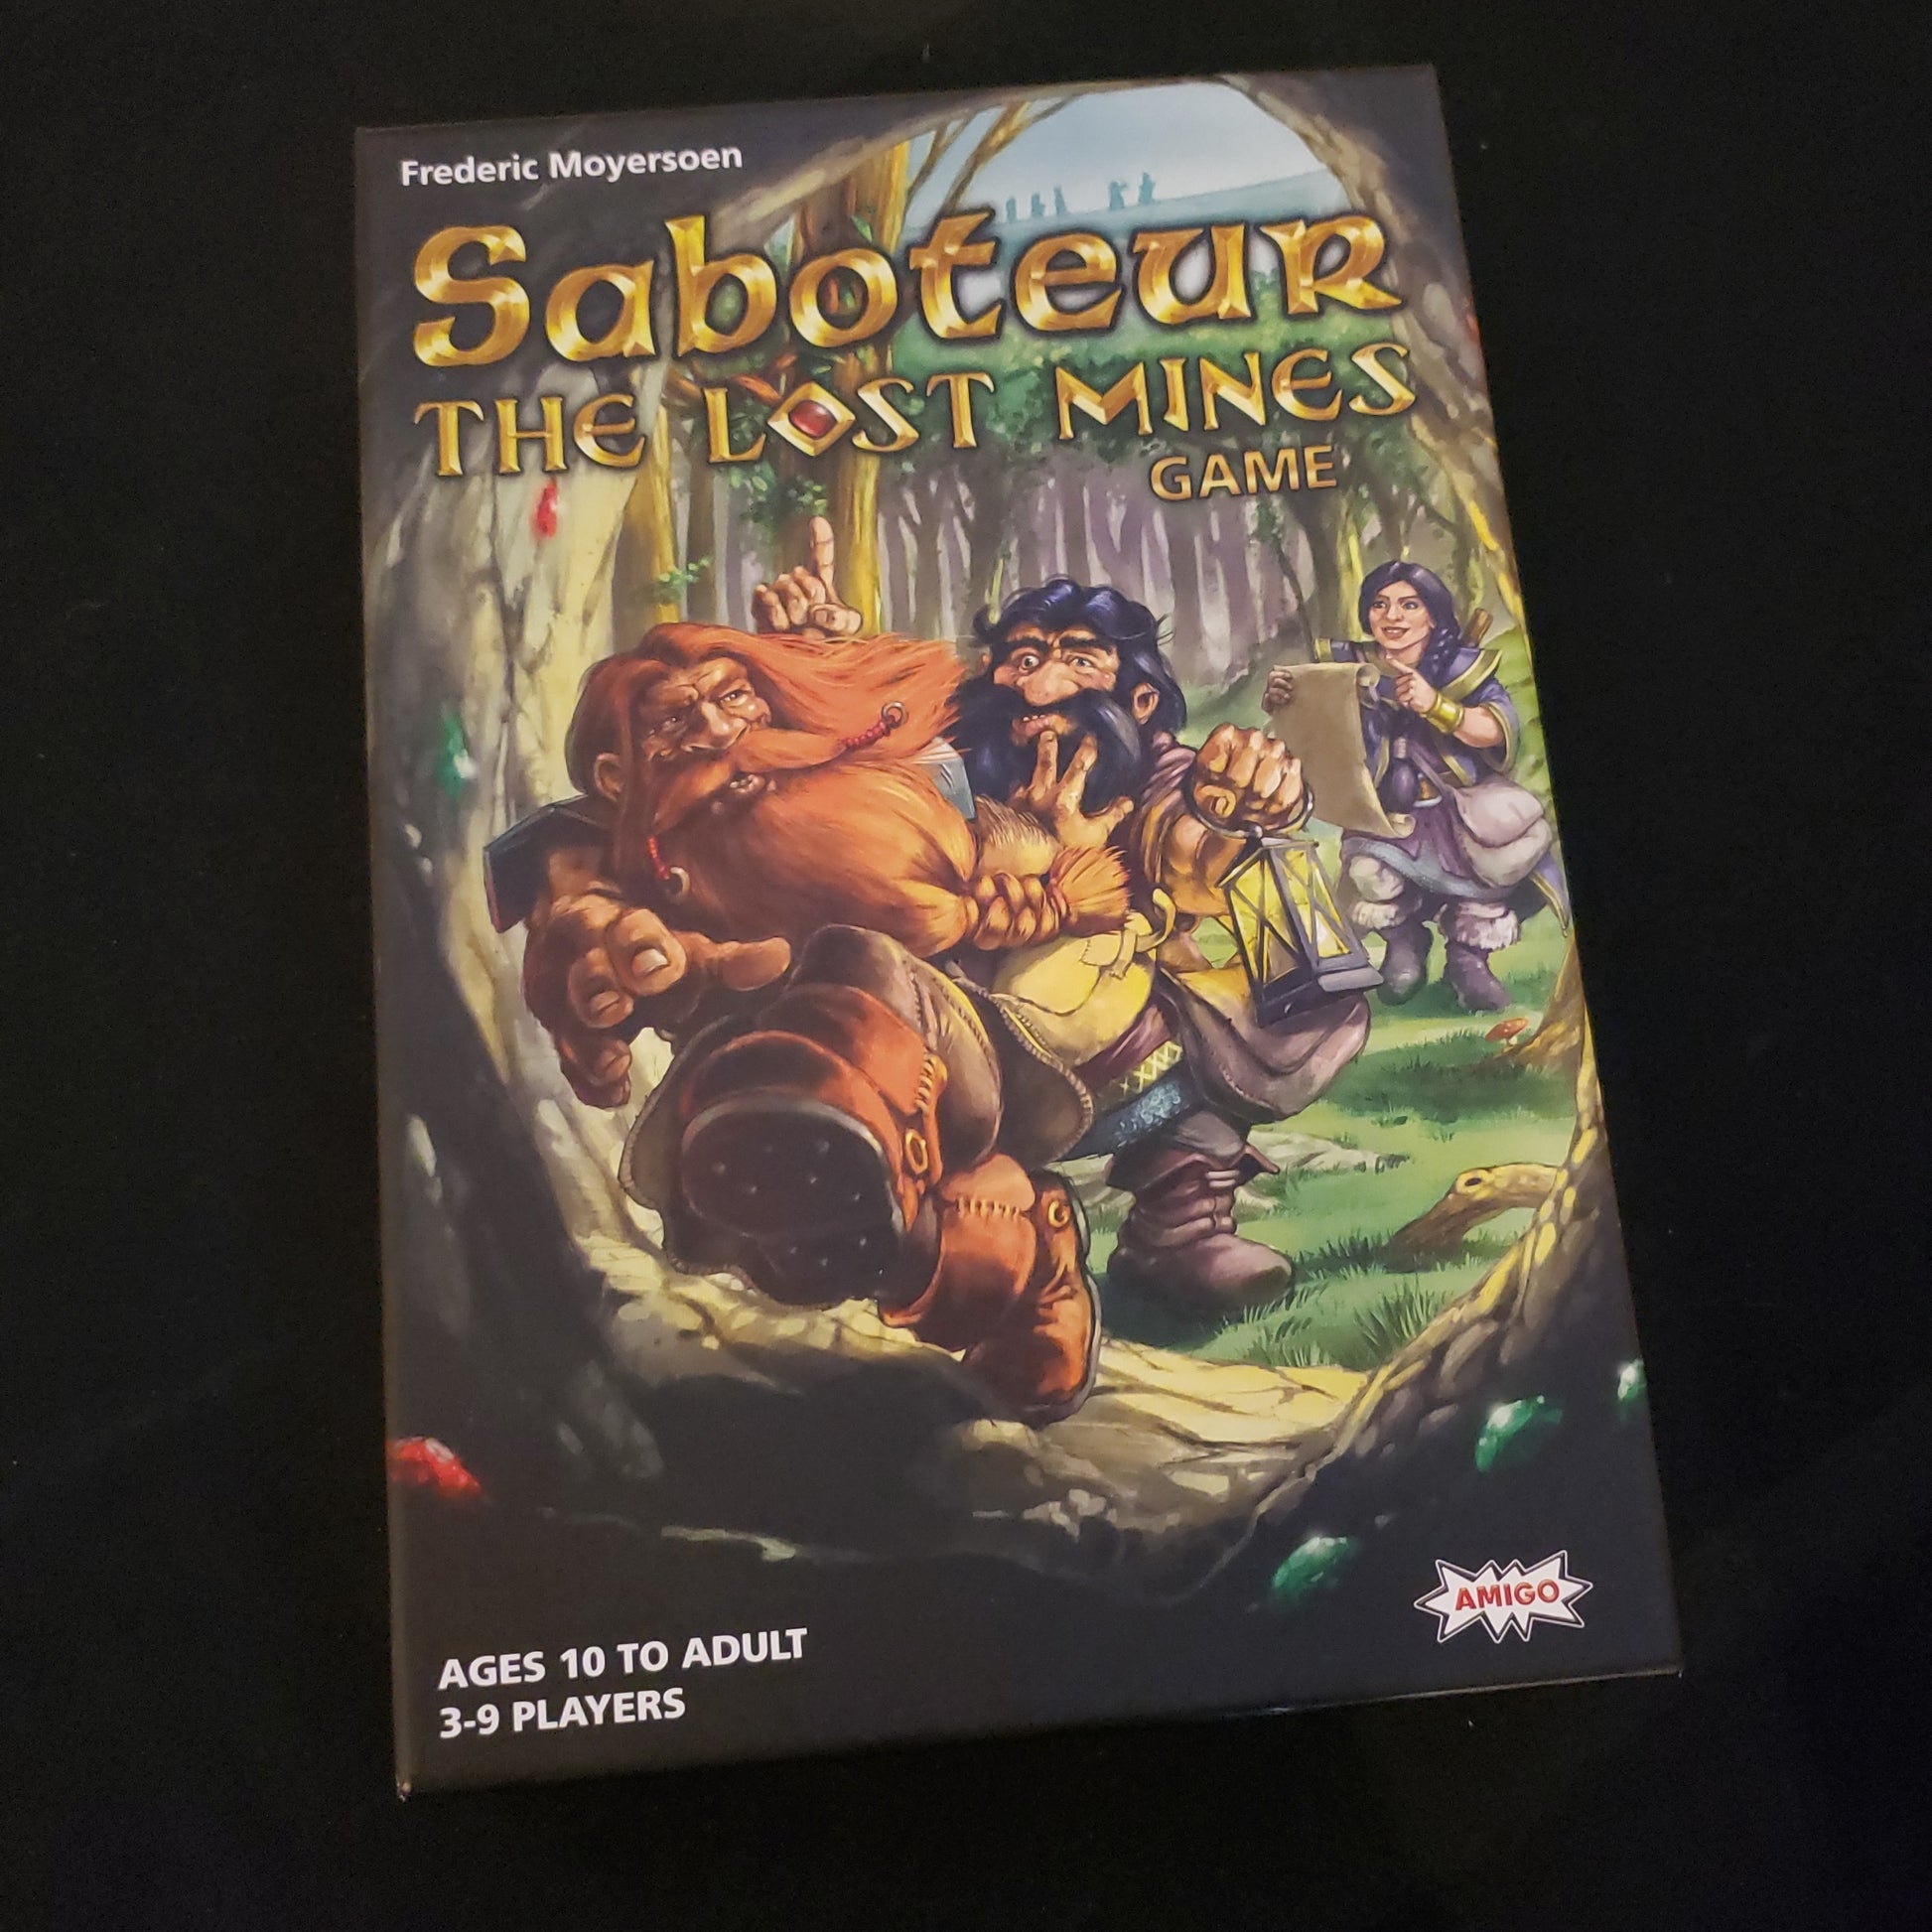 Image shows the front cover of the box of the Saboteur: The Lost Mines board game